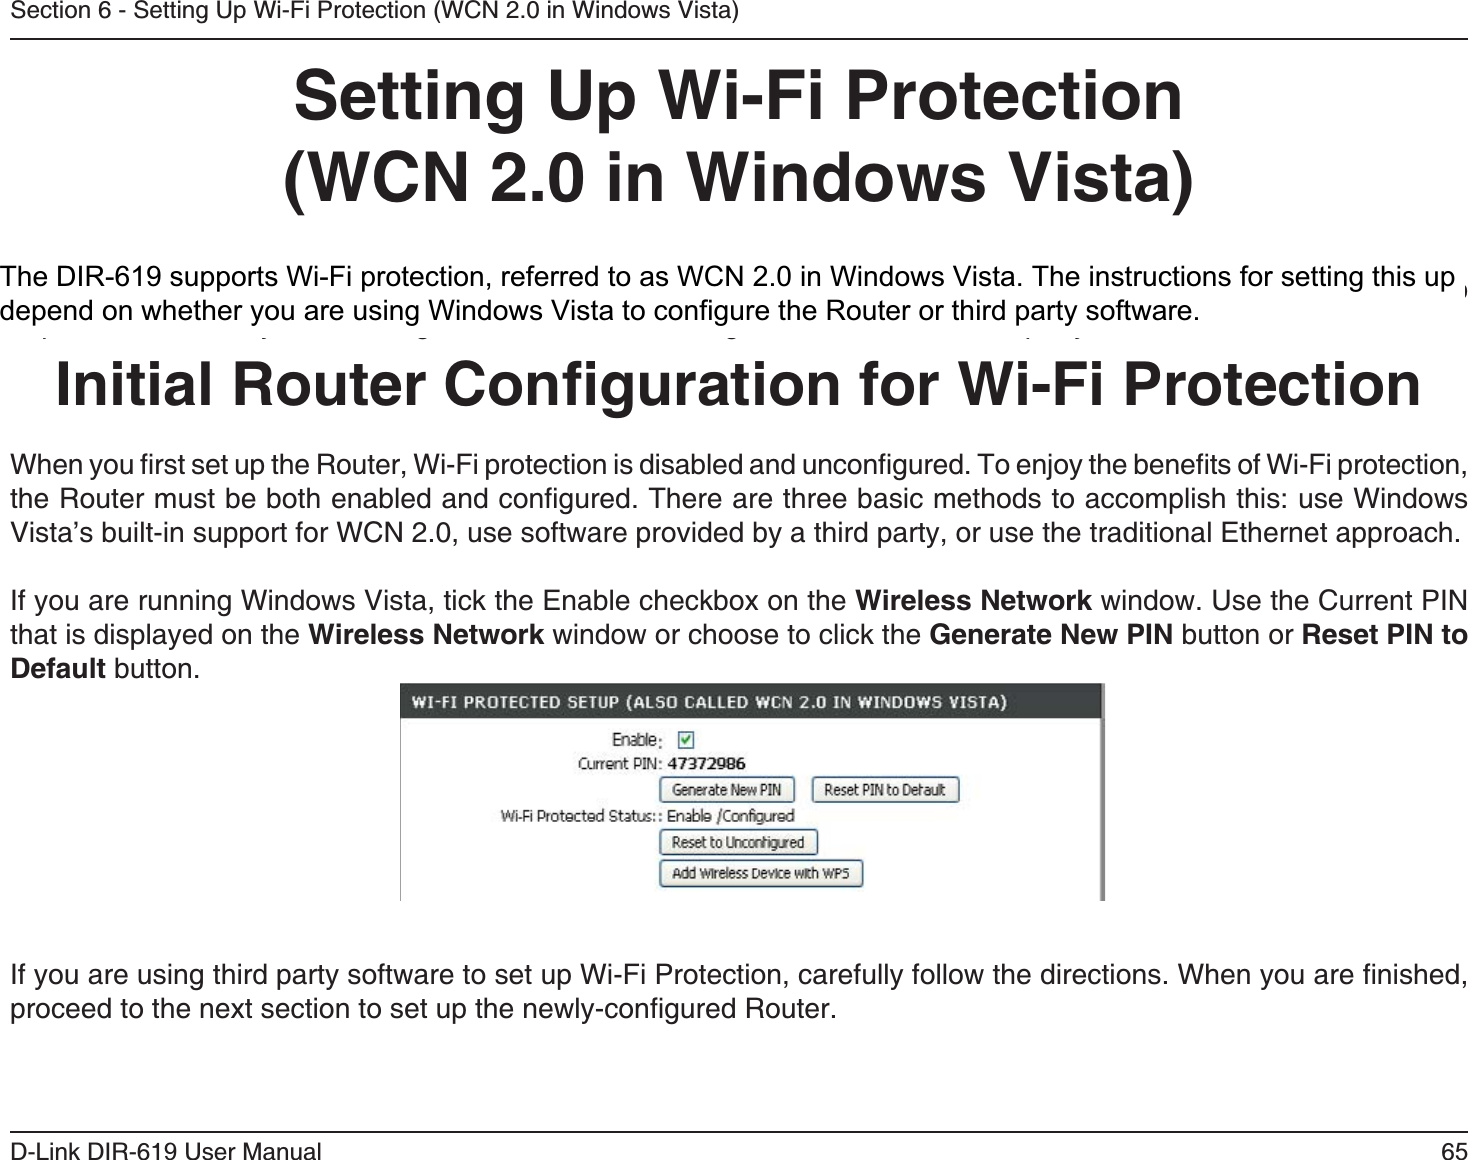 6D-Link DIR-61 User ManualSection 6 - Setting Up Wi-Fi Protection (WCN 2.0 in Windows Vista)Setting Up Wi-Fi Protection(WCN 2.0 in Windows Vista)The DIR-618 supports Wi-Fi protection, referred to as WCN 2.0 in Windows Vista. The instructions for setting this up depend on whether you are using Windows Vista to conﬁgure the Router or third party software.        Initial Router Conﬁguration for Wi-Fi ProtectionWhen you ﬁrst set up the Router, Wi-Fi protection is disabled and unconﬁgured. To enjoy the beneﬁts of Wi-Fi protection, the Router must be both enabled and conﬁgured. There are three basic methods to accomplish this: use Windows Vista’s built-in support for WCN 2.0, use software provided by a third party, or use the traditional Ethernet approach. If you are running Windows Vista, tick the Enable checkbox on the Wireless Network window. Use the Current PINthat is displayed on the Wireless Network window or choose to click the Generate New PIN button or Reset PIN to Default button. If you are using third party software to set up Wi-Fi Protection, carefully follow the directions. When you are ﬁnished, proceed to the next section to set up the newly-conﬁgured Router.The DIR-619 supports Wi-Fi protection, referred to as WCN 2.0 in Windows Vista. The instructions for setting this updepend on whether you are using Windows Vista to configure the Router or third party software.